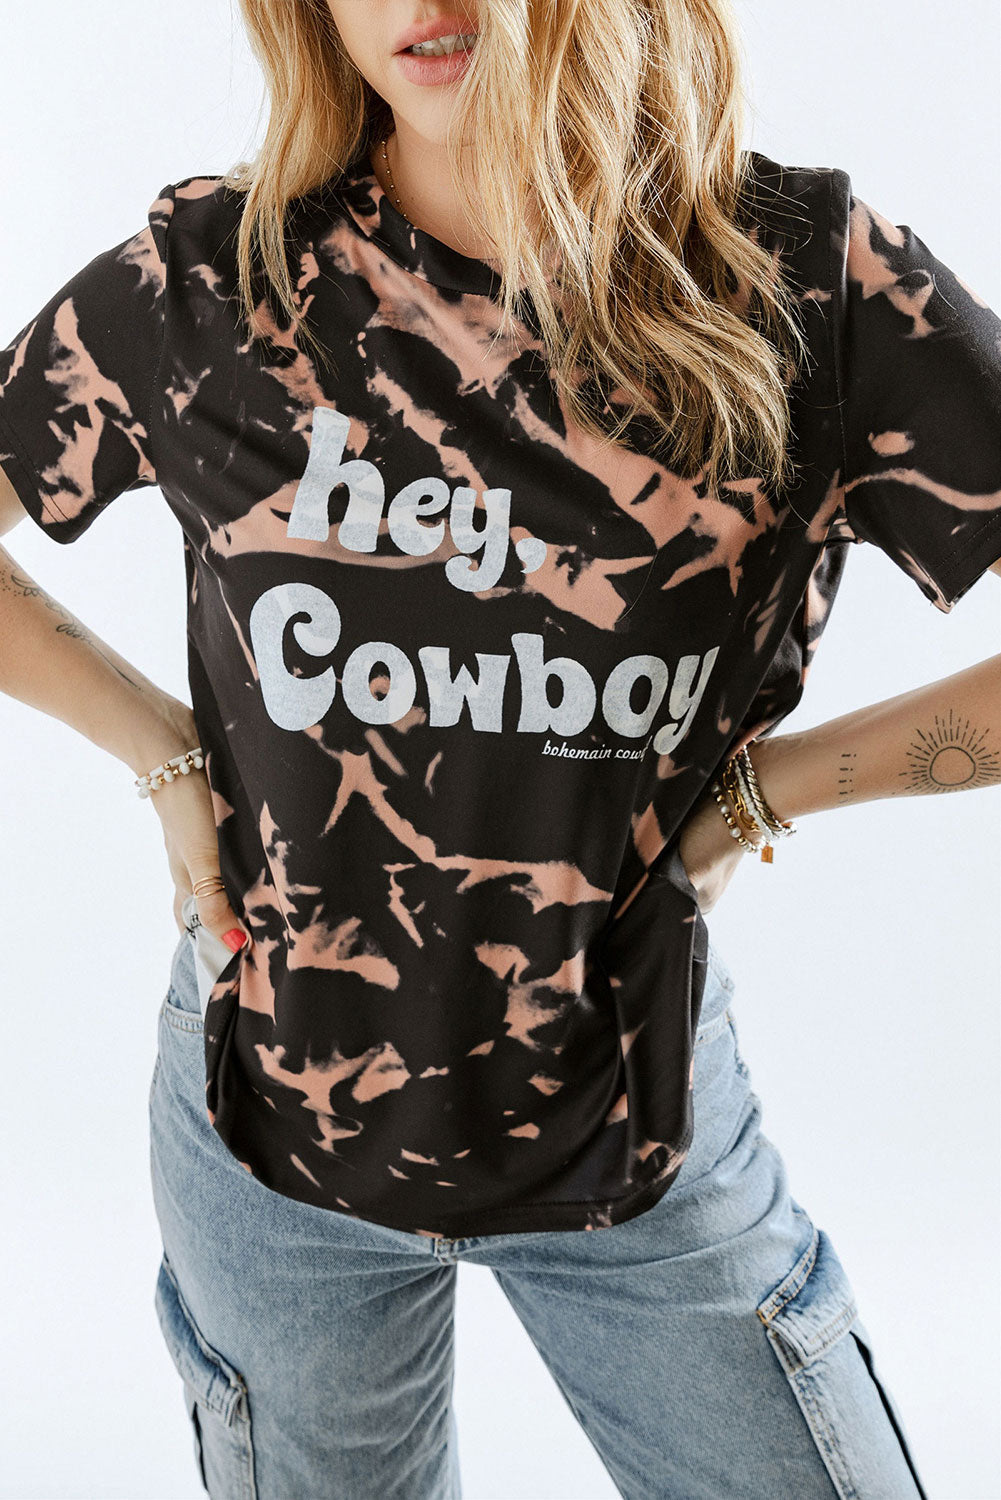 Hey Cowboy Bohemian Cowgirl Graphic Tie-Dye T-Shirt - Wildly Max